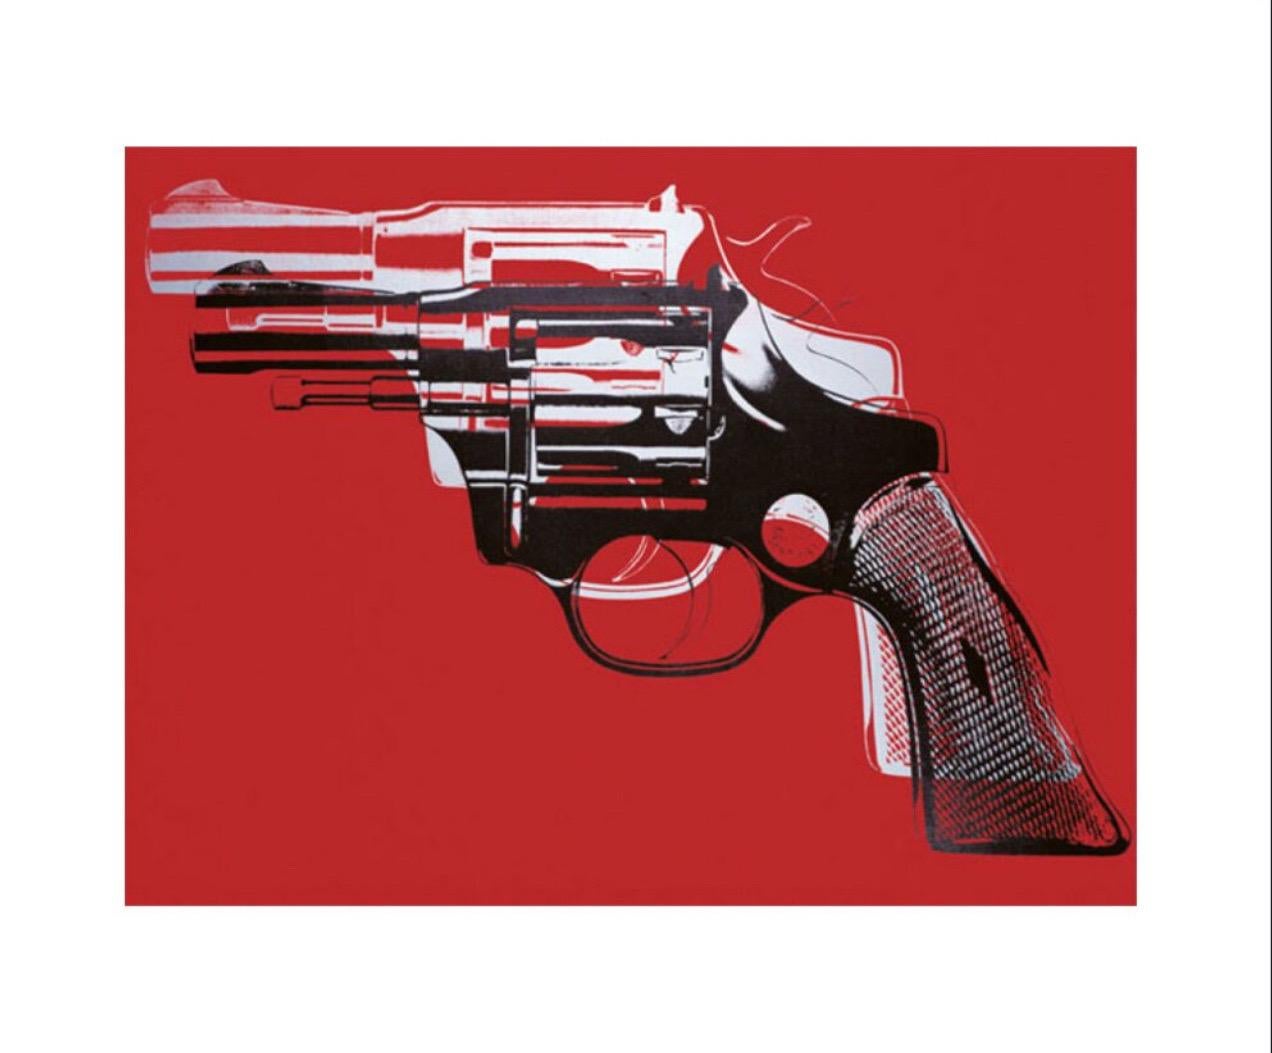 Andy Warhol, Guns (white and black on red)

250gsm coated graphic paper

Image size 20 × 29 cm (7.87 x 11.41 in) 
Paper size 28 × 36 cm (11.02 x 14.17 in) 

In August 1962, Andy Warhol began to generate the imagery for his painting from photographs